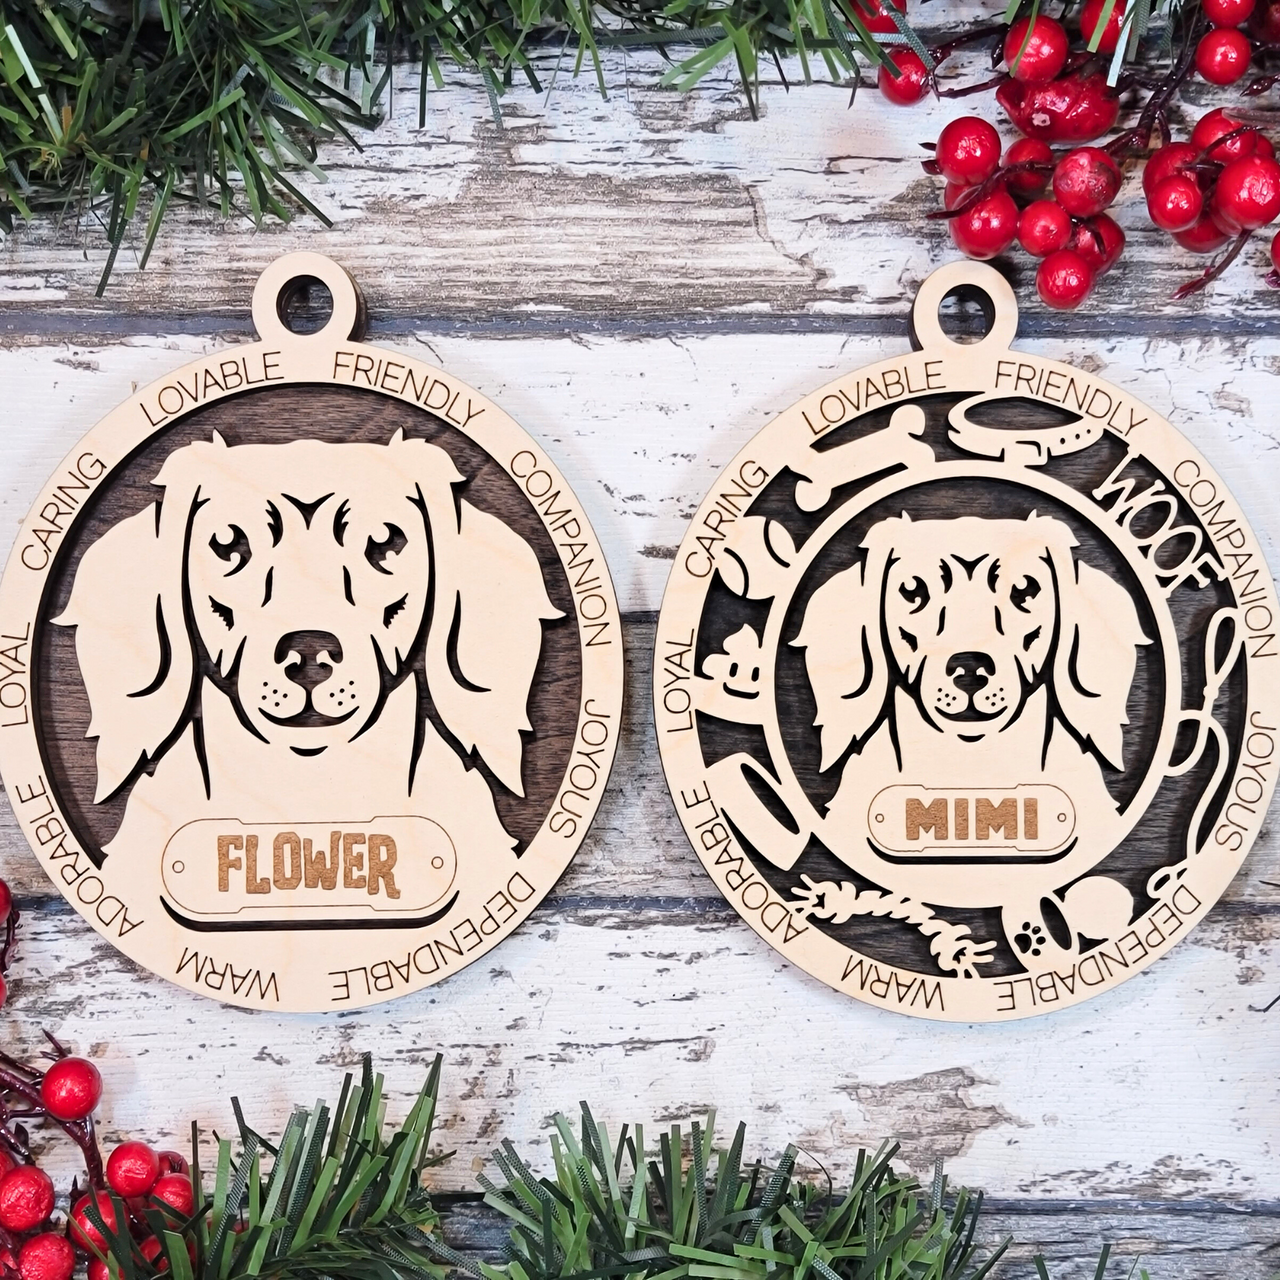 https://cdn11.bigcommerce.com/s-qpkwpy4/images/stencil/1280x1280/products/21138/100292/Dog_Ornaments_7__32791.1695247412.png?c=2?imbypass=on